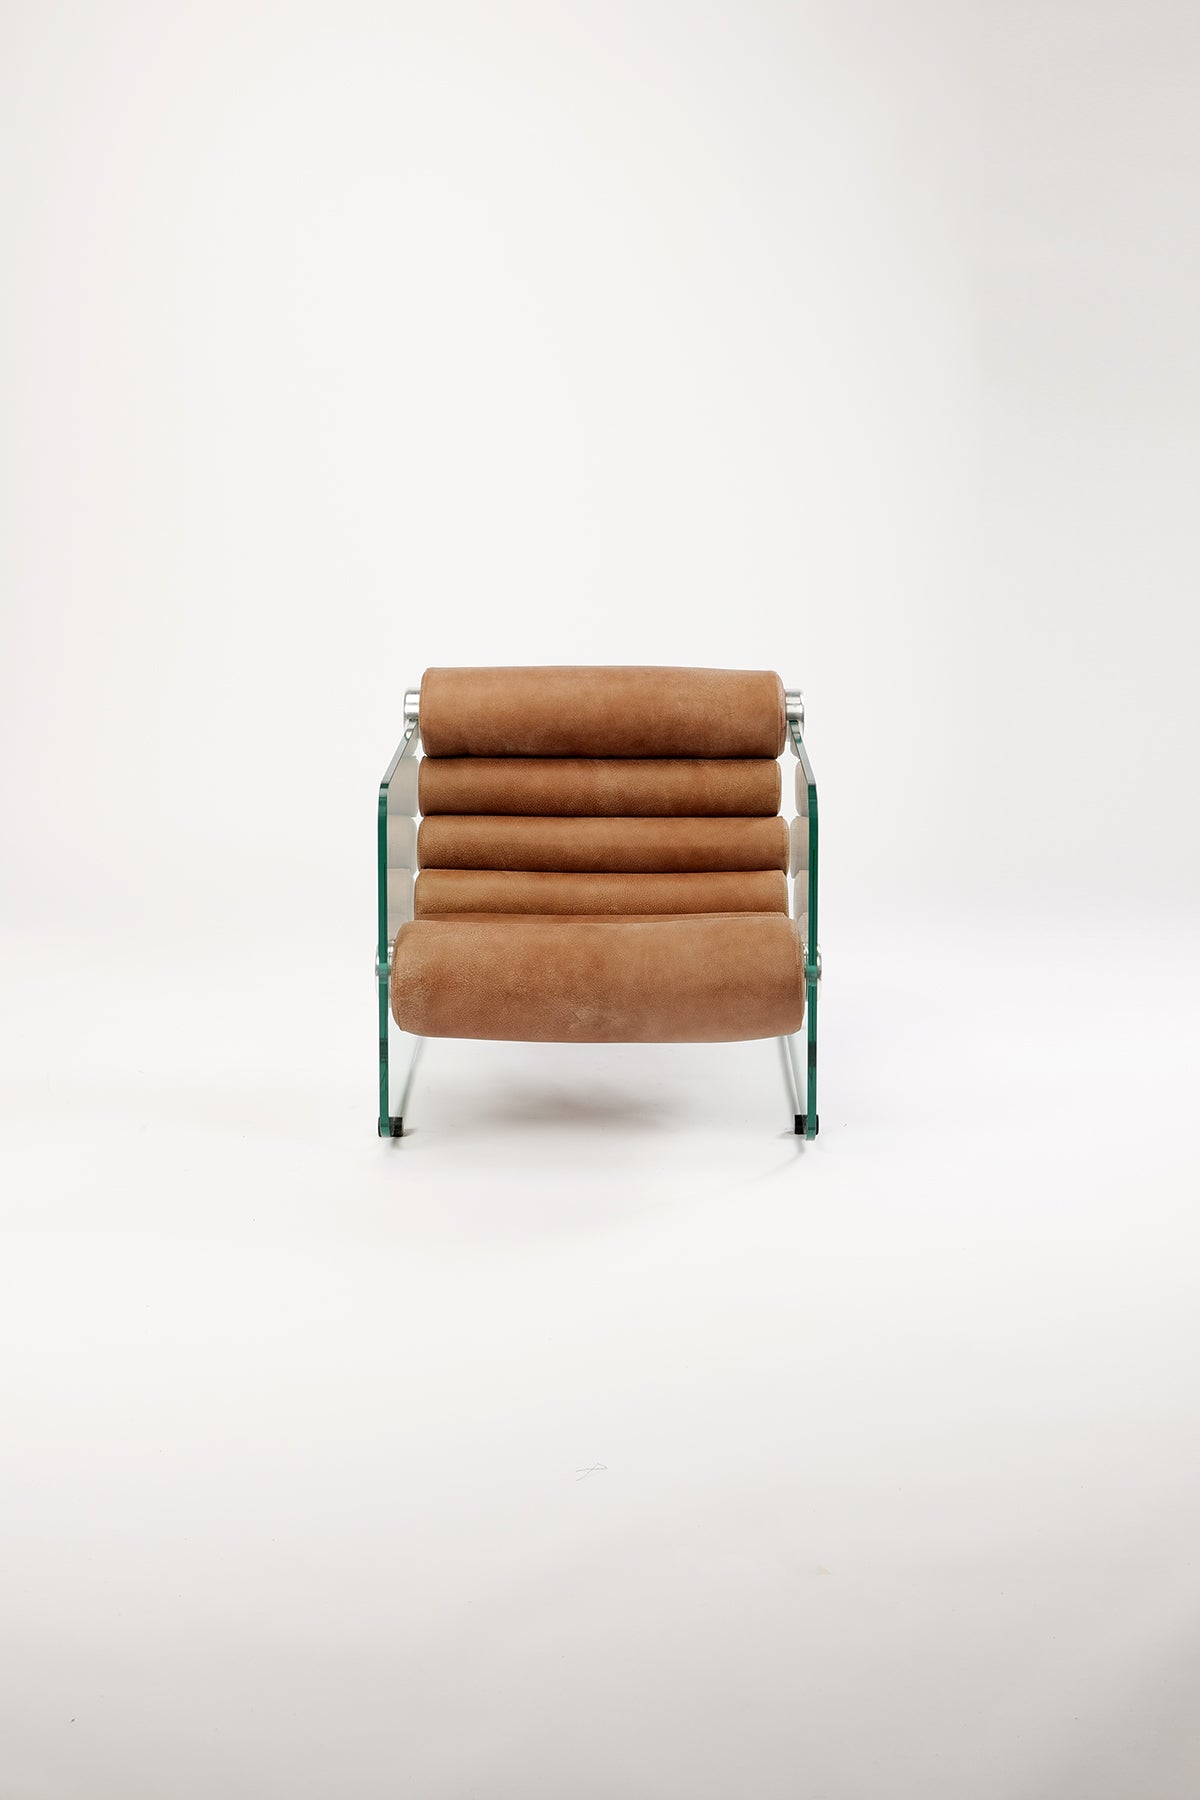 Fabio Lenci 'Hyaline' Brown Leather Armchair (2 Available)